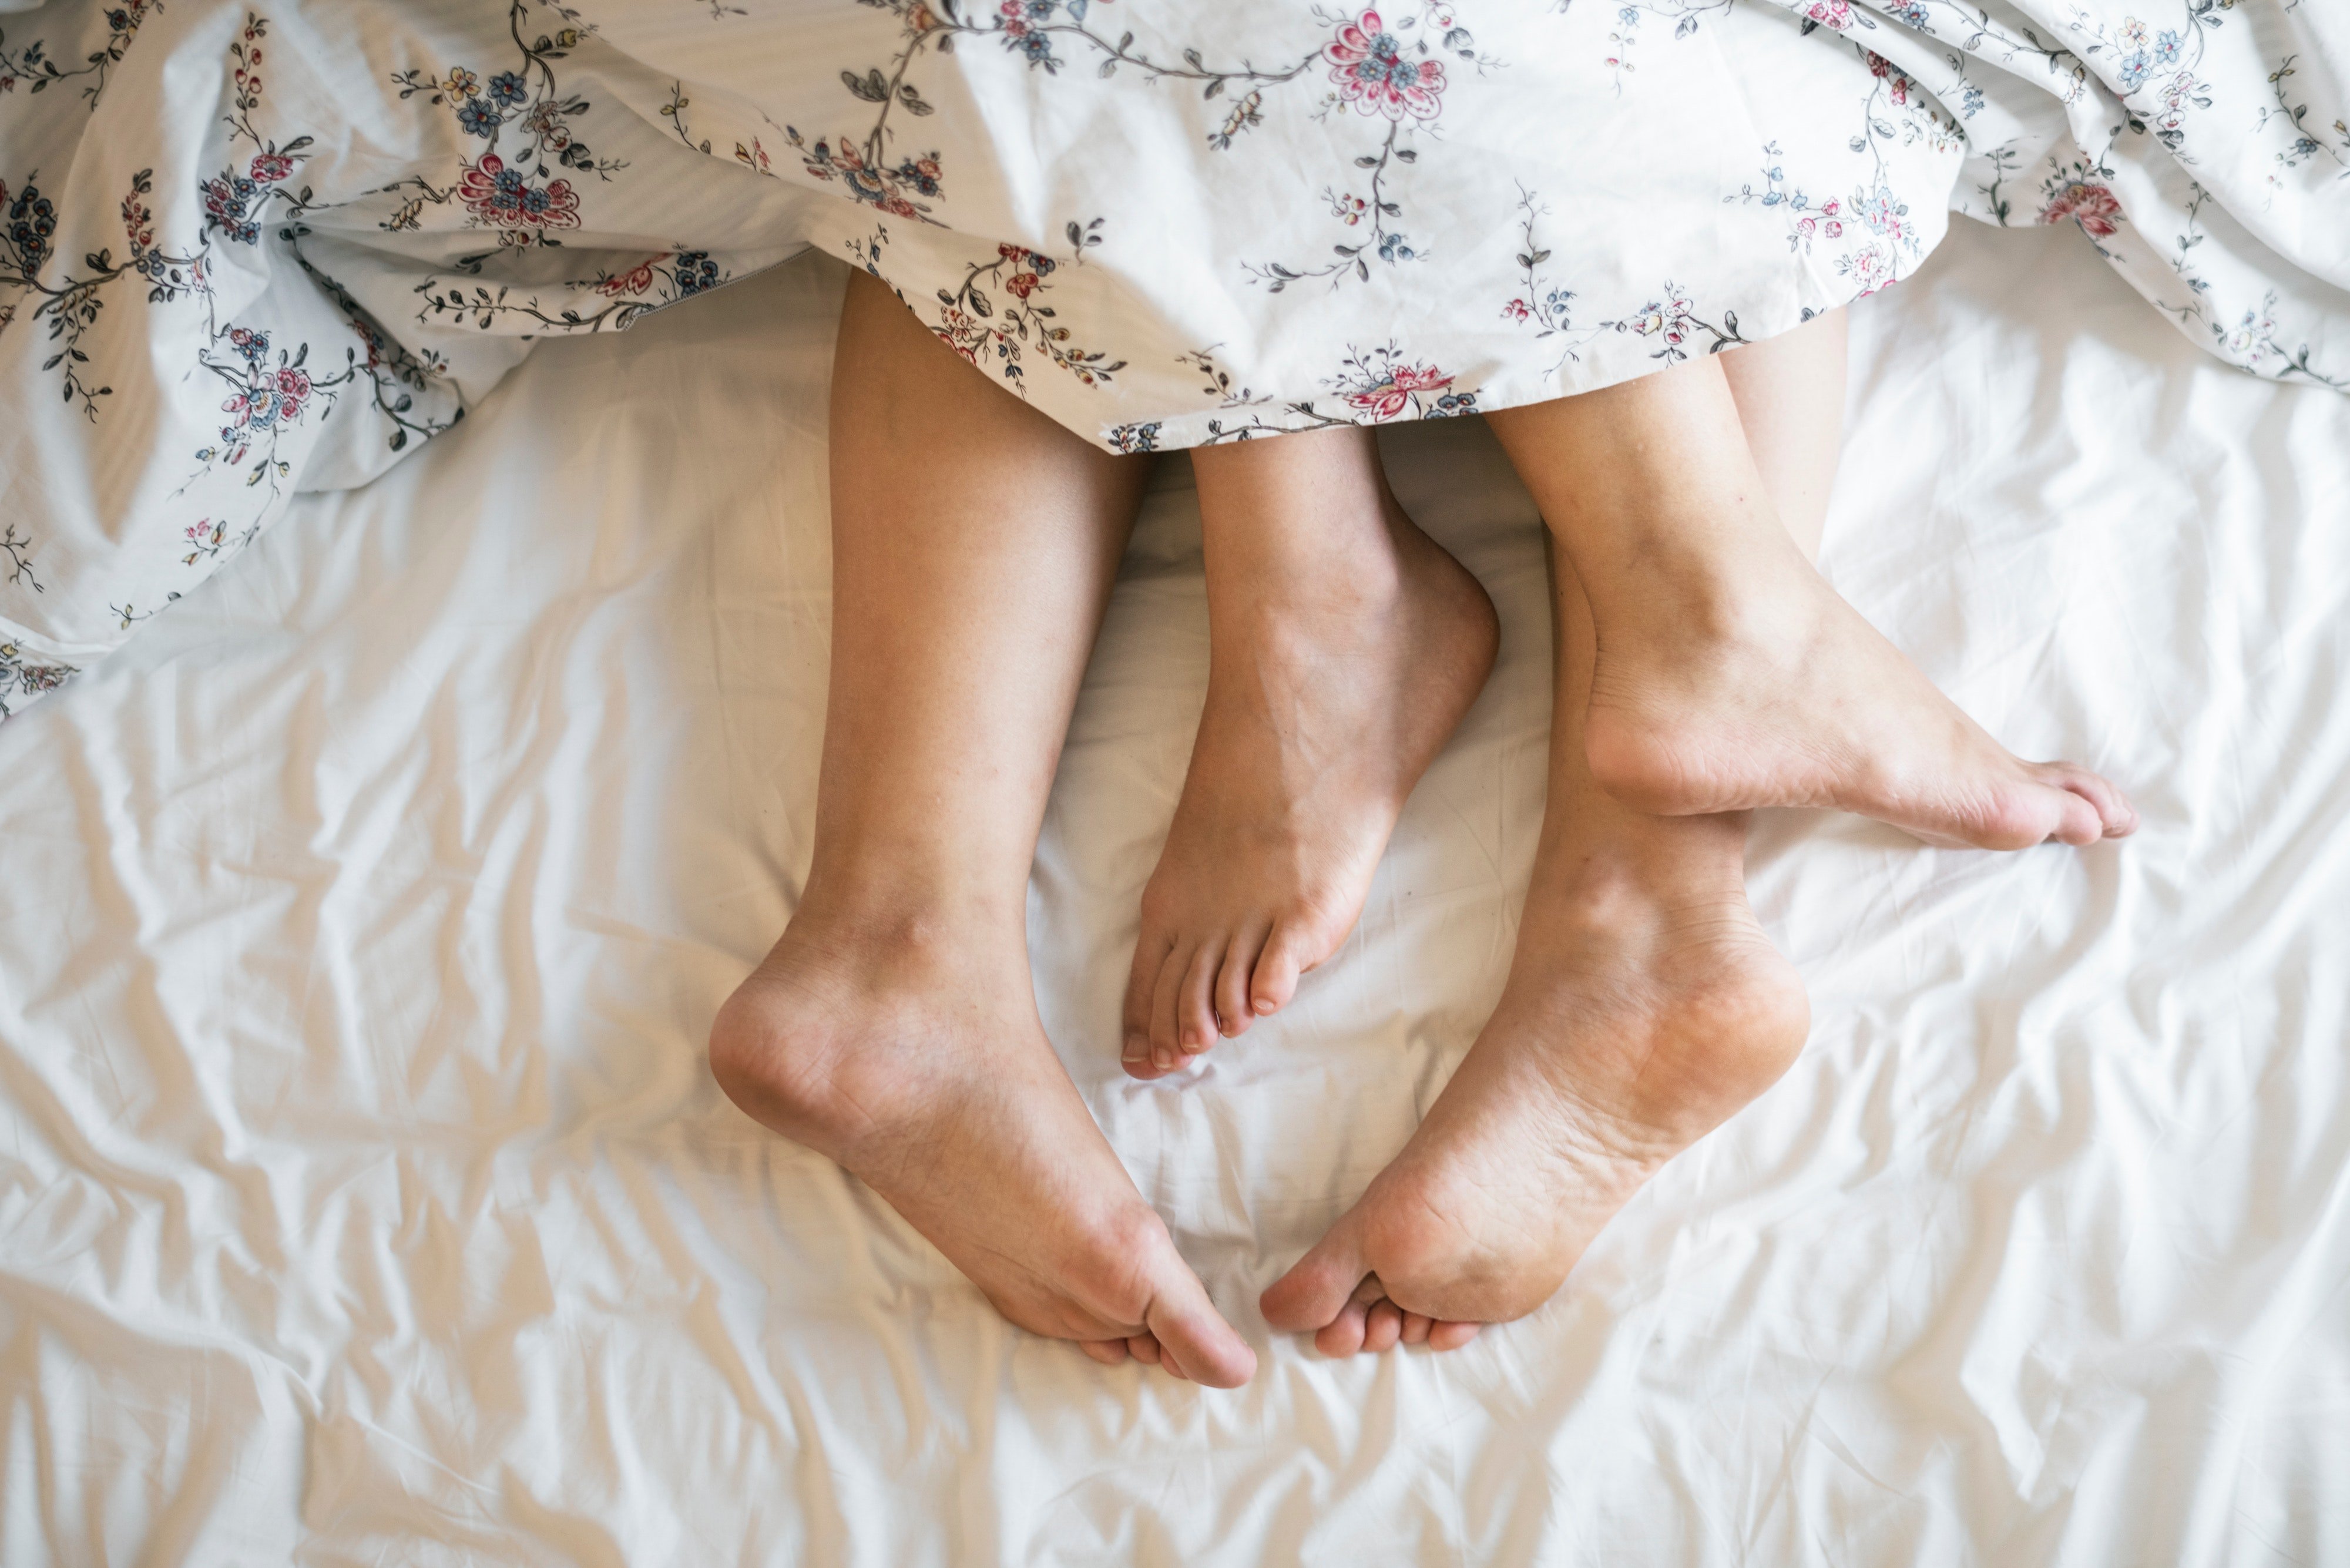 Adults sleeping on a bed. | Source: Pexels